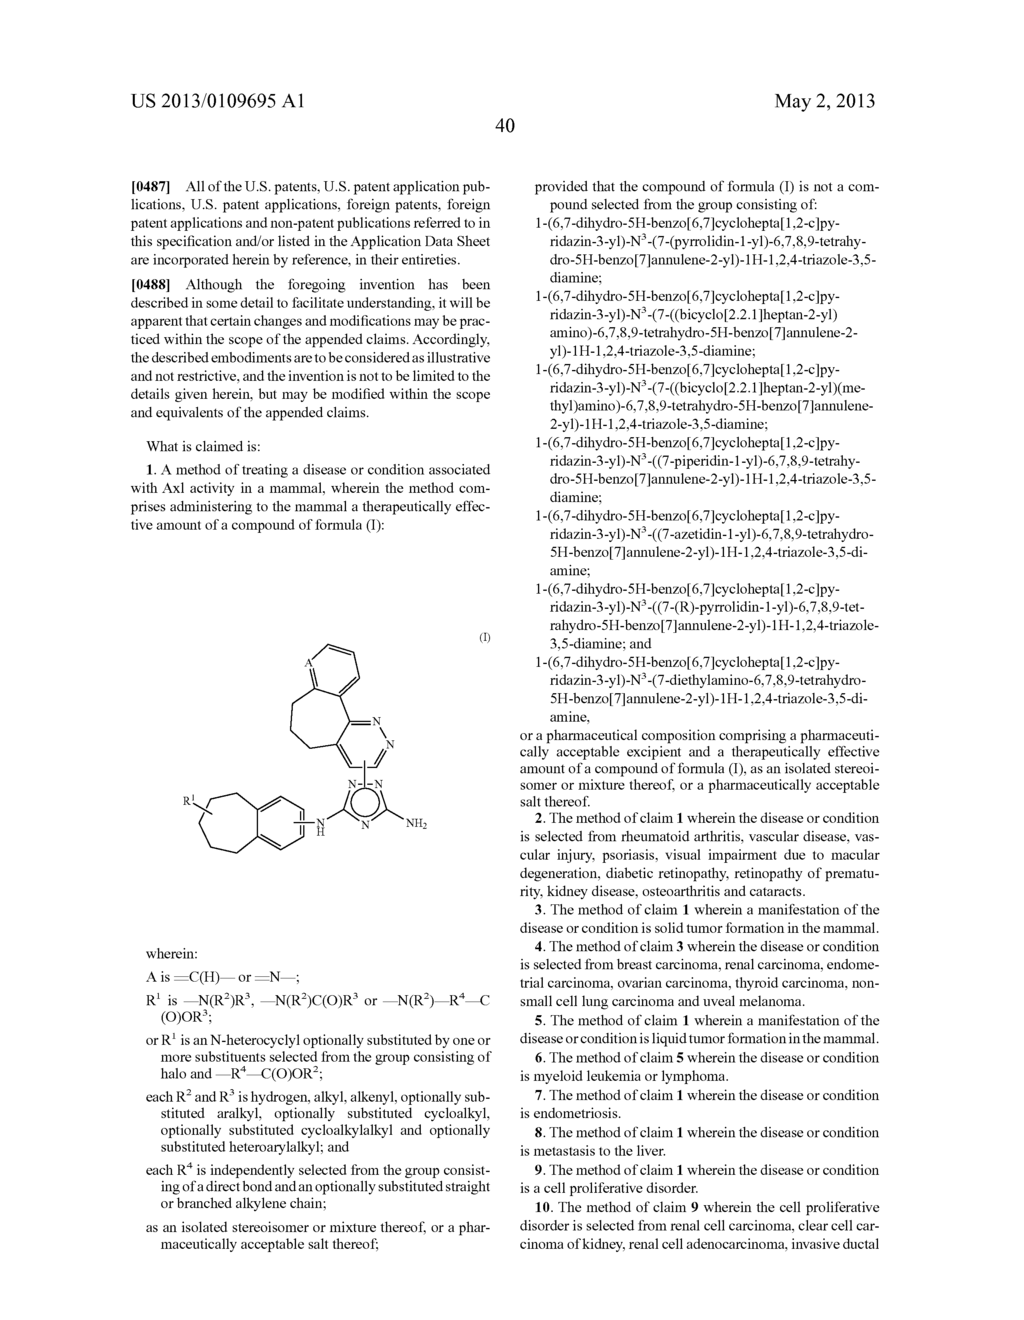 POLYCYCLIC HETEROARYL SUBSTITUTED TRIAZOLES USEFUL AS AXL INHIBITORS - diagram, schematic, and image 41